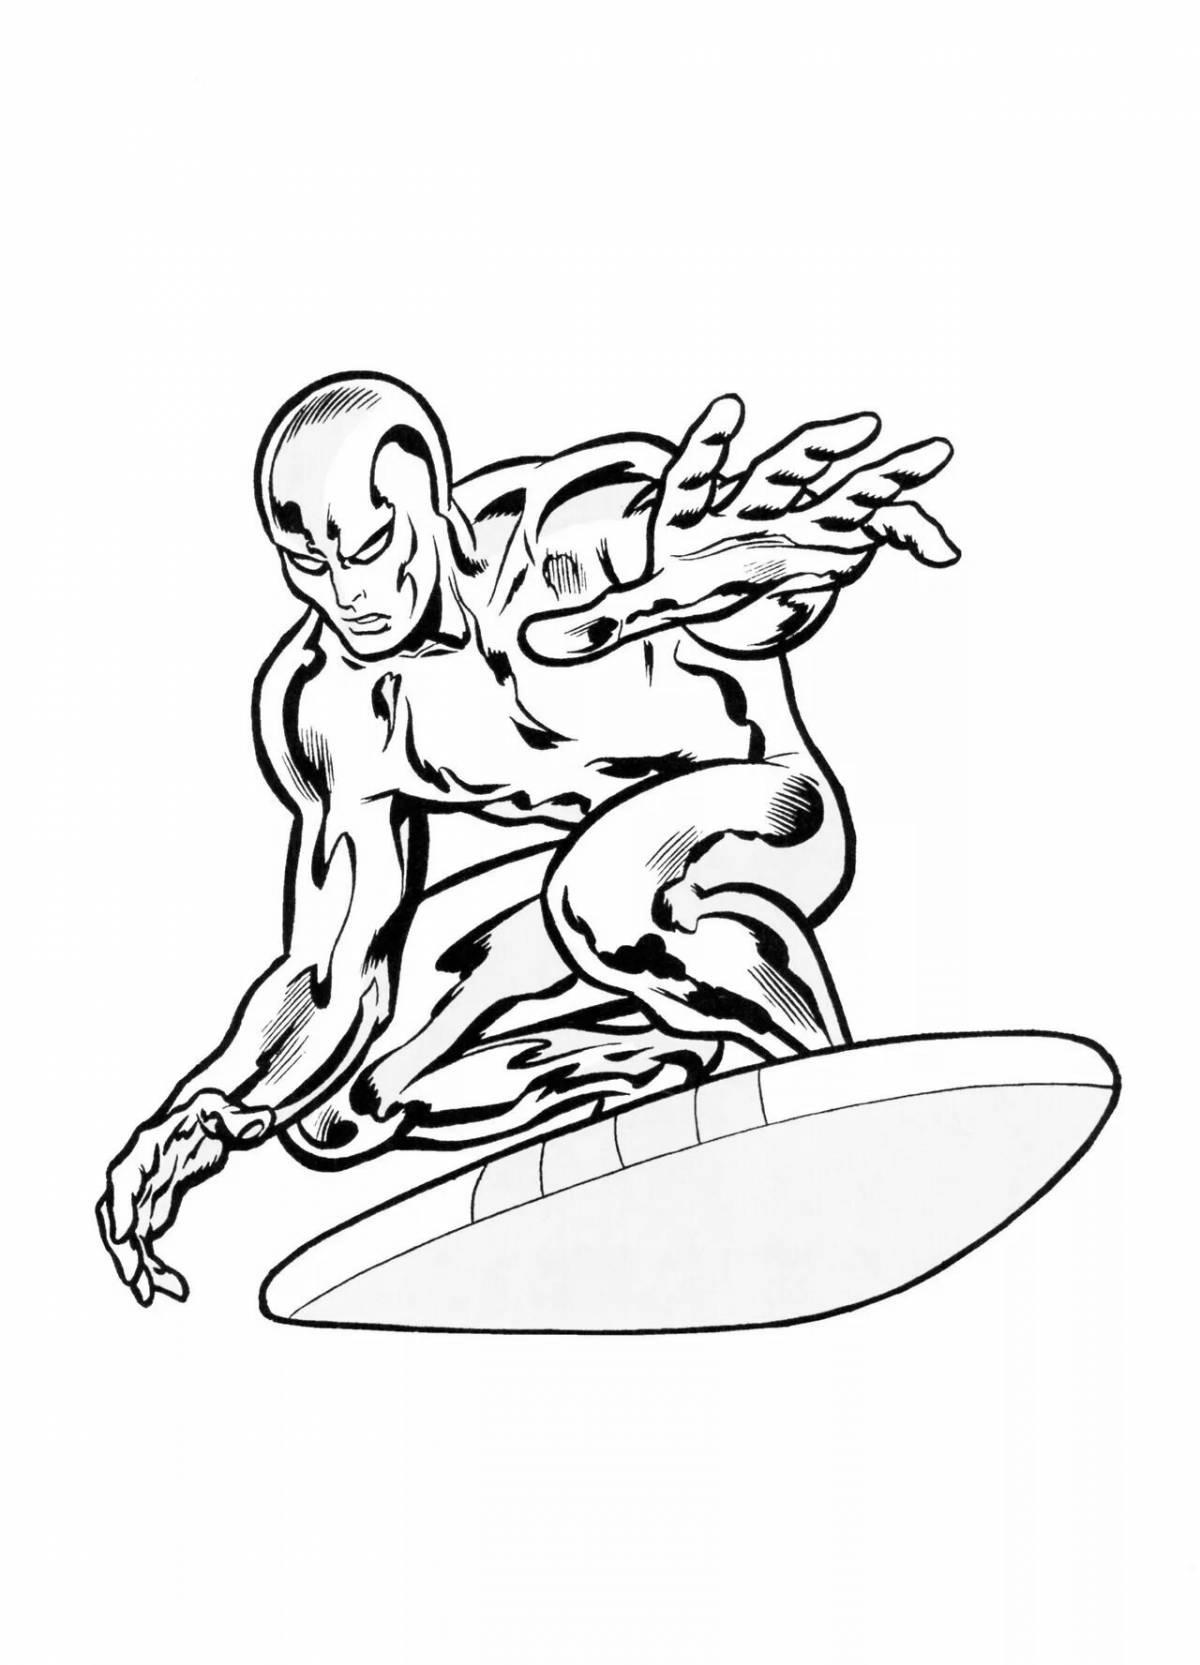 Greatly colored silver surfer coloring page